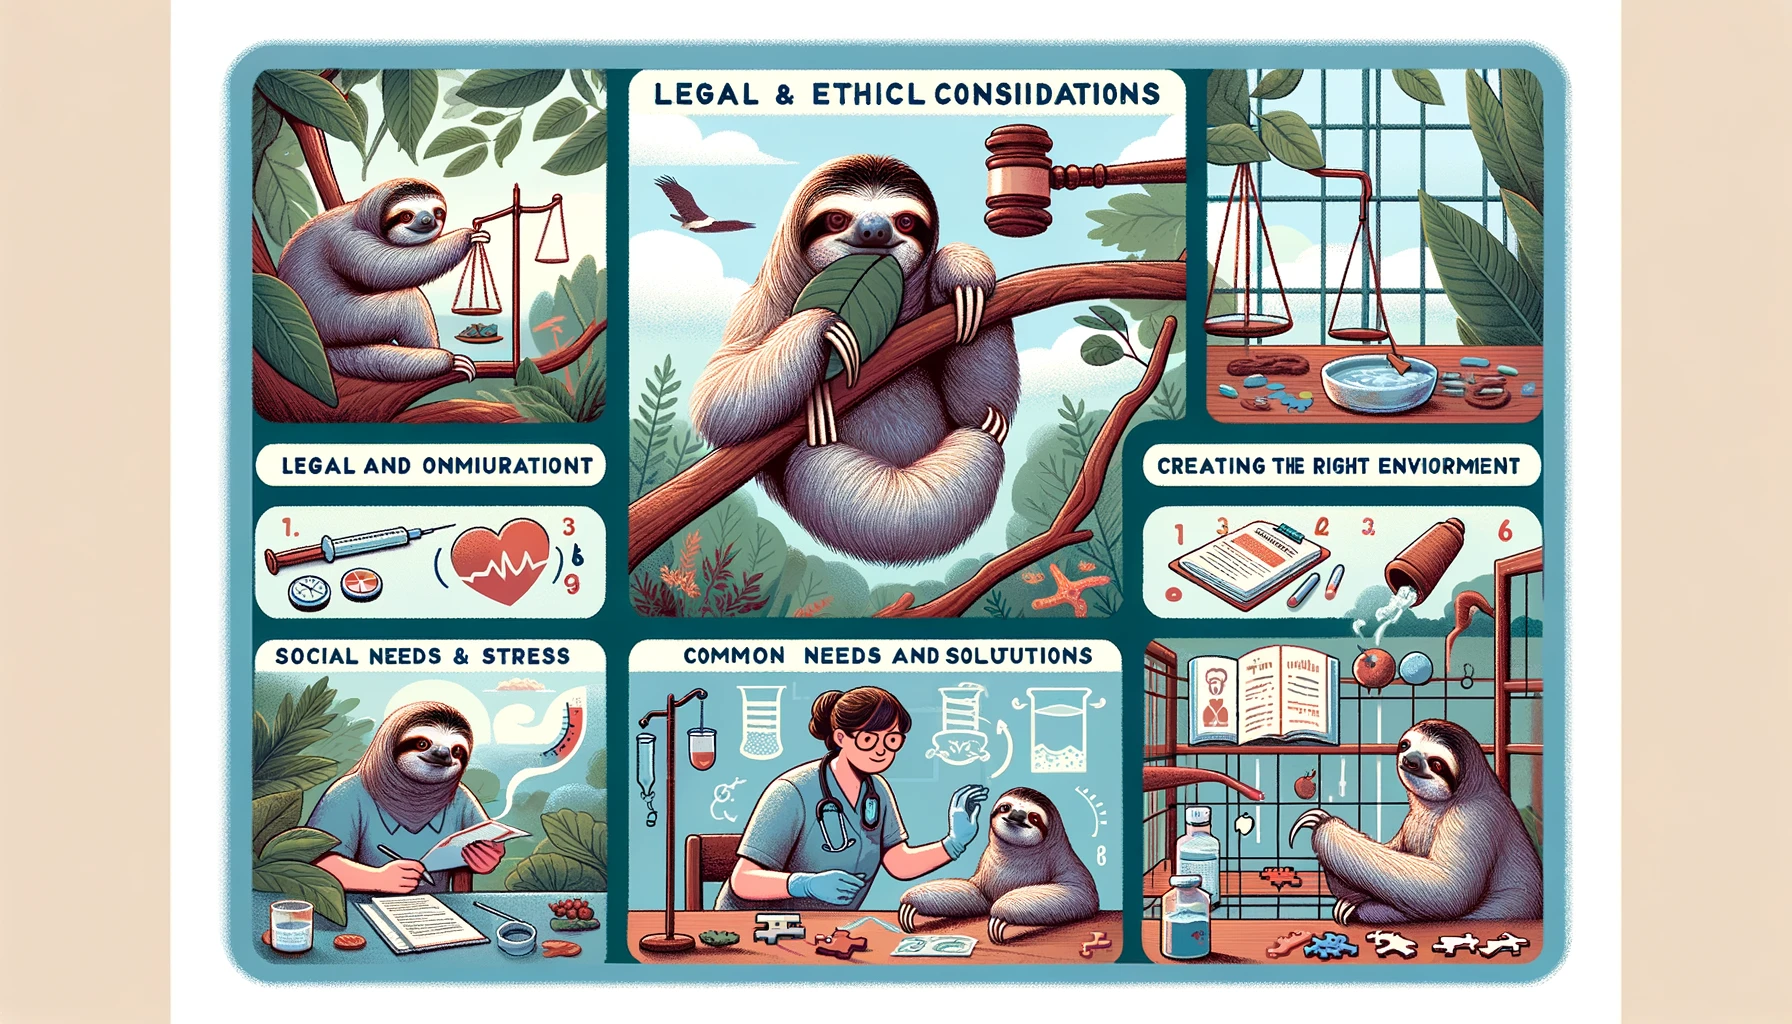 overview of the comprehensive guide to sloth care, covering the essential aspects from introduction to sloth care, legal and ethical considerations, creating the right environment, diet and nutrition, health and wellness, to social needs and interaction, and addressing common challenges and solutions. Each section is depicted to emphasize the dedication and detailed attention required for the well-being of a sloth as a pet.